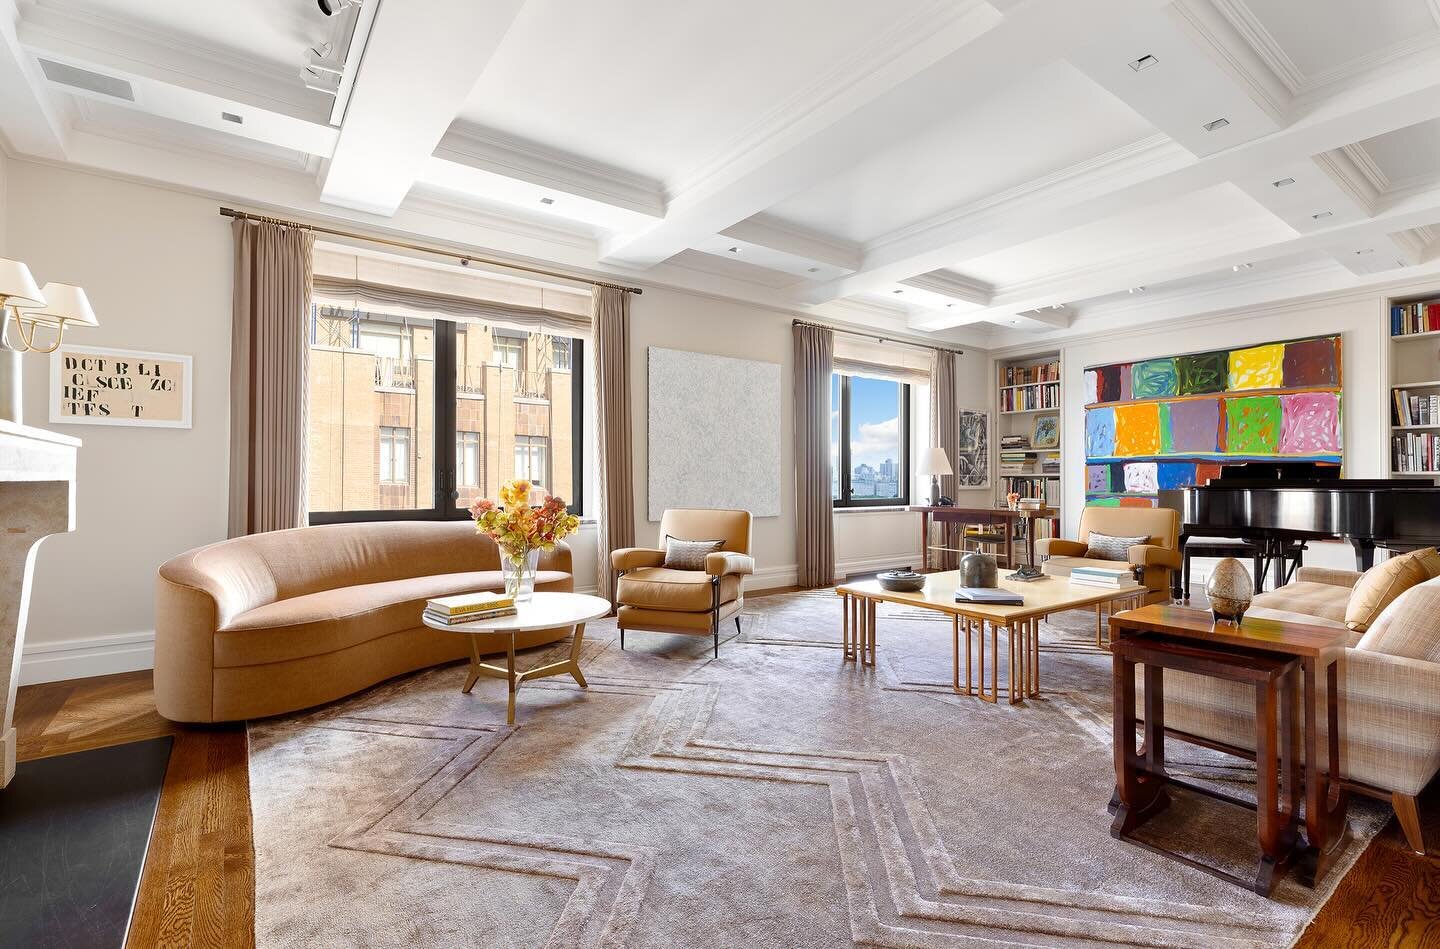 Just Listed // This grandly scaled and beautifully renovated duplex, with four bedrooms and four-and-a-half baths, is ideally configured for gracious living // $13,995,000 
/
/
/
#nycrealestate #upperwestside #compass #compassny #luxurylistings #real